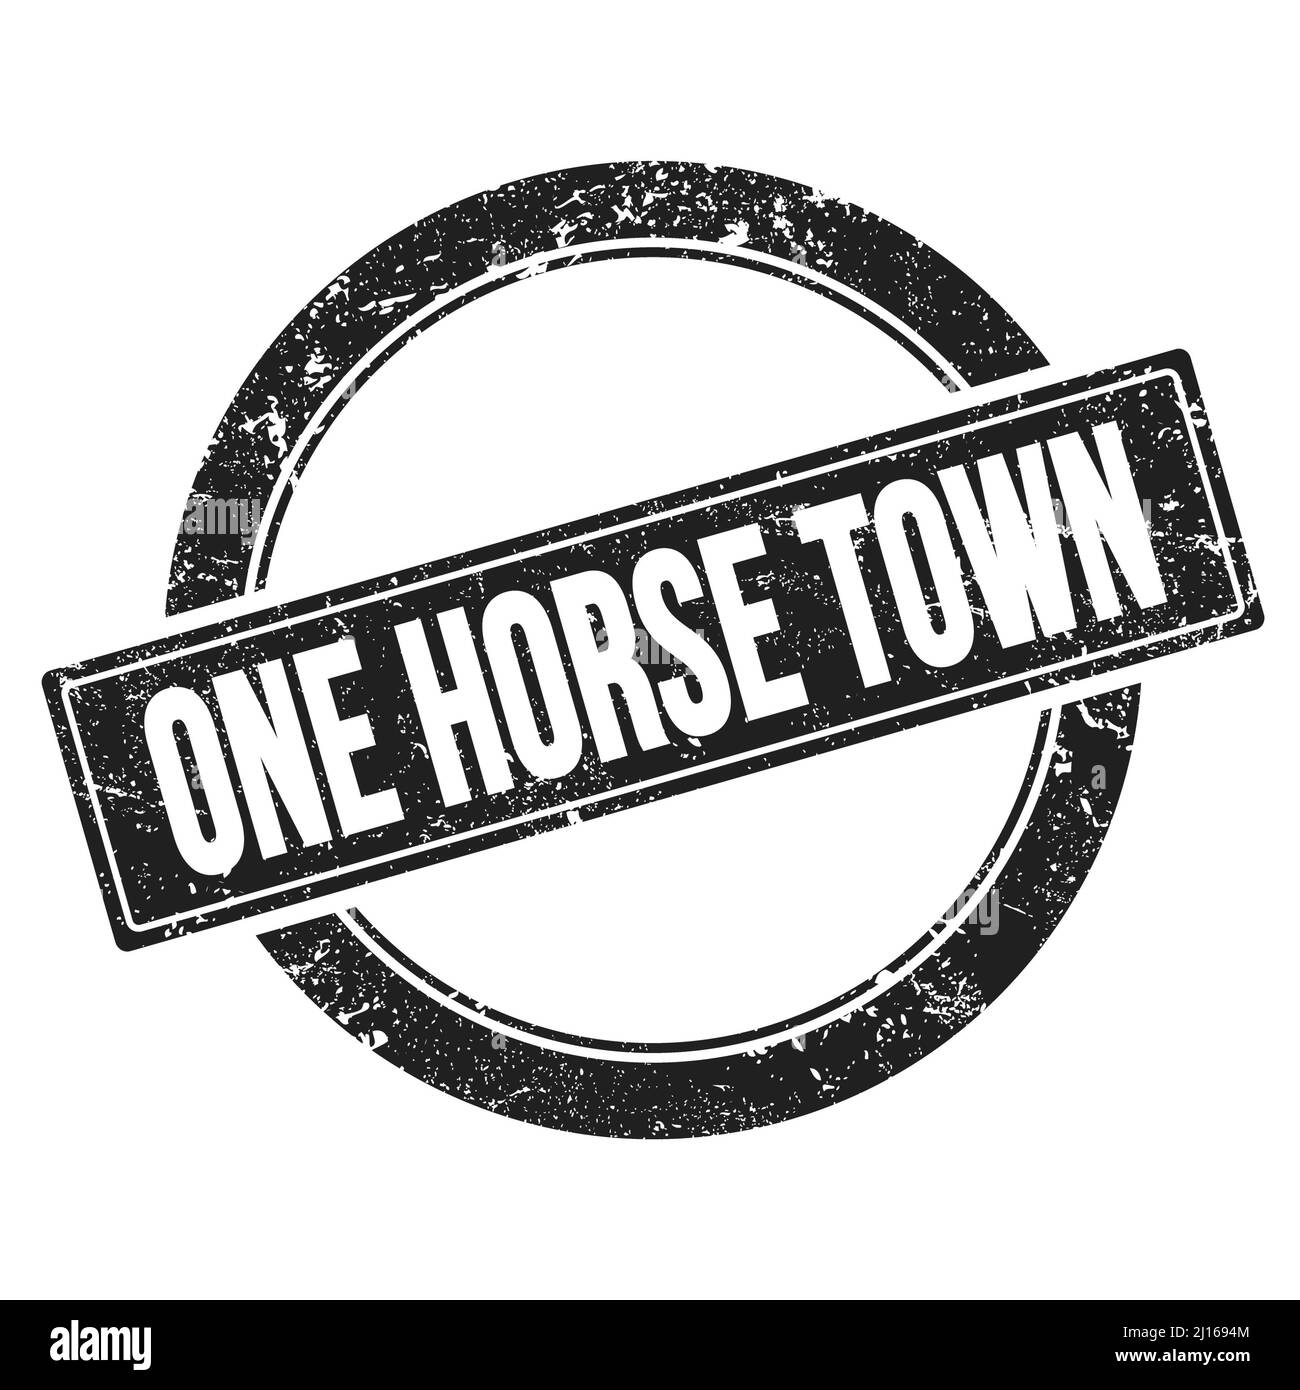 ONE HORSE TOWN text on black round vintage stamp. Stock Photo